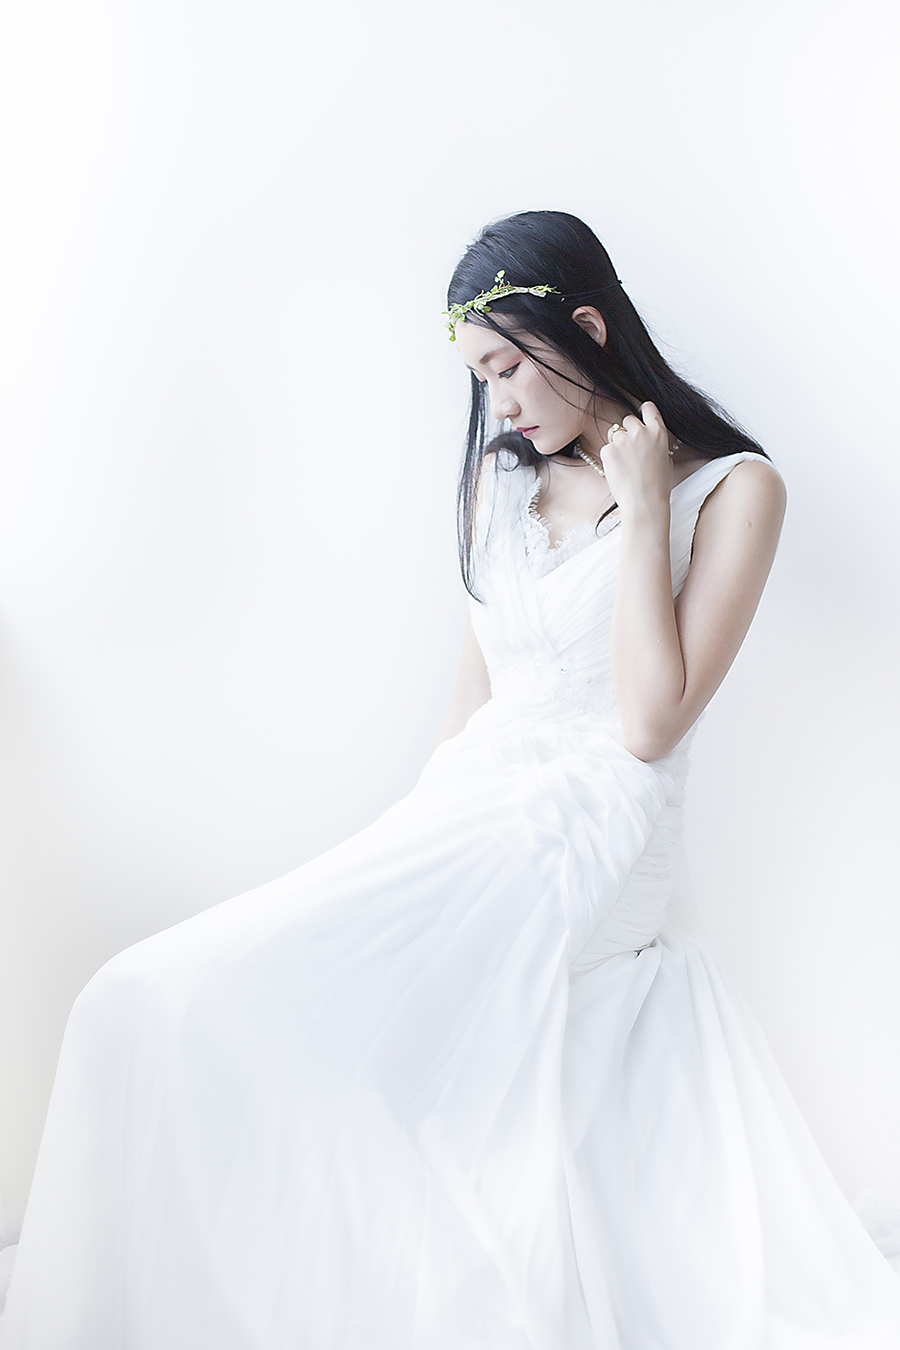 Rosa Novias white wedding gown, Paris Kids floral headband, handed down pearl necklace and pearl ring.